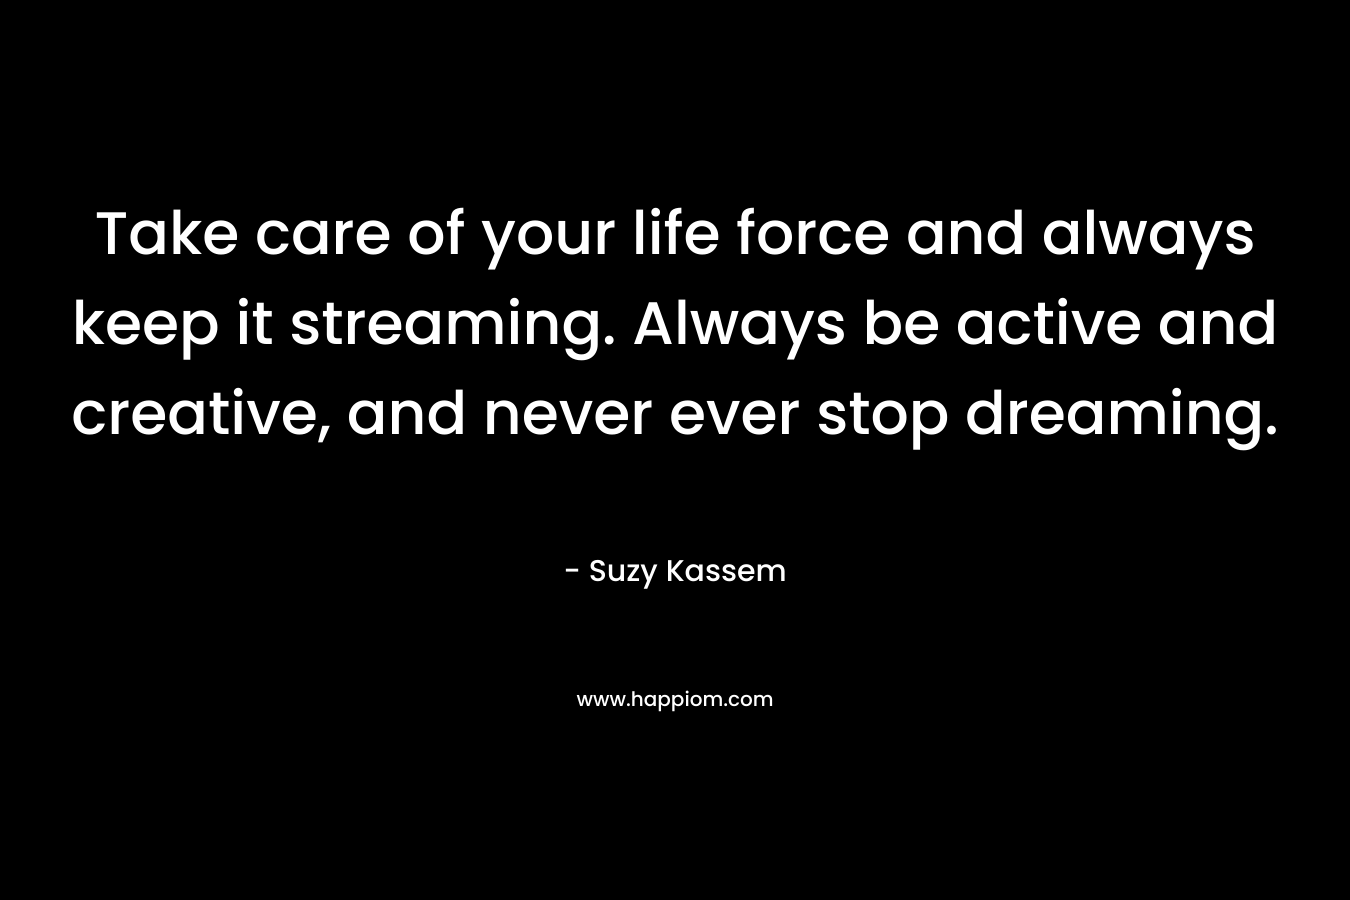 Take care of your life force and always keep it streaming. Always be active and creative, and never ever stop dreaming.